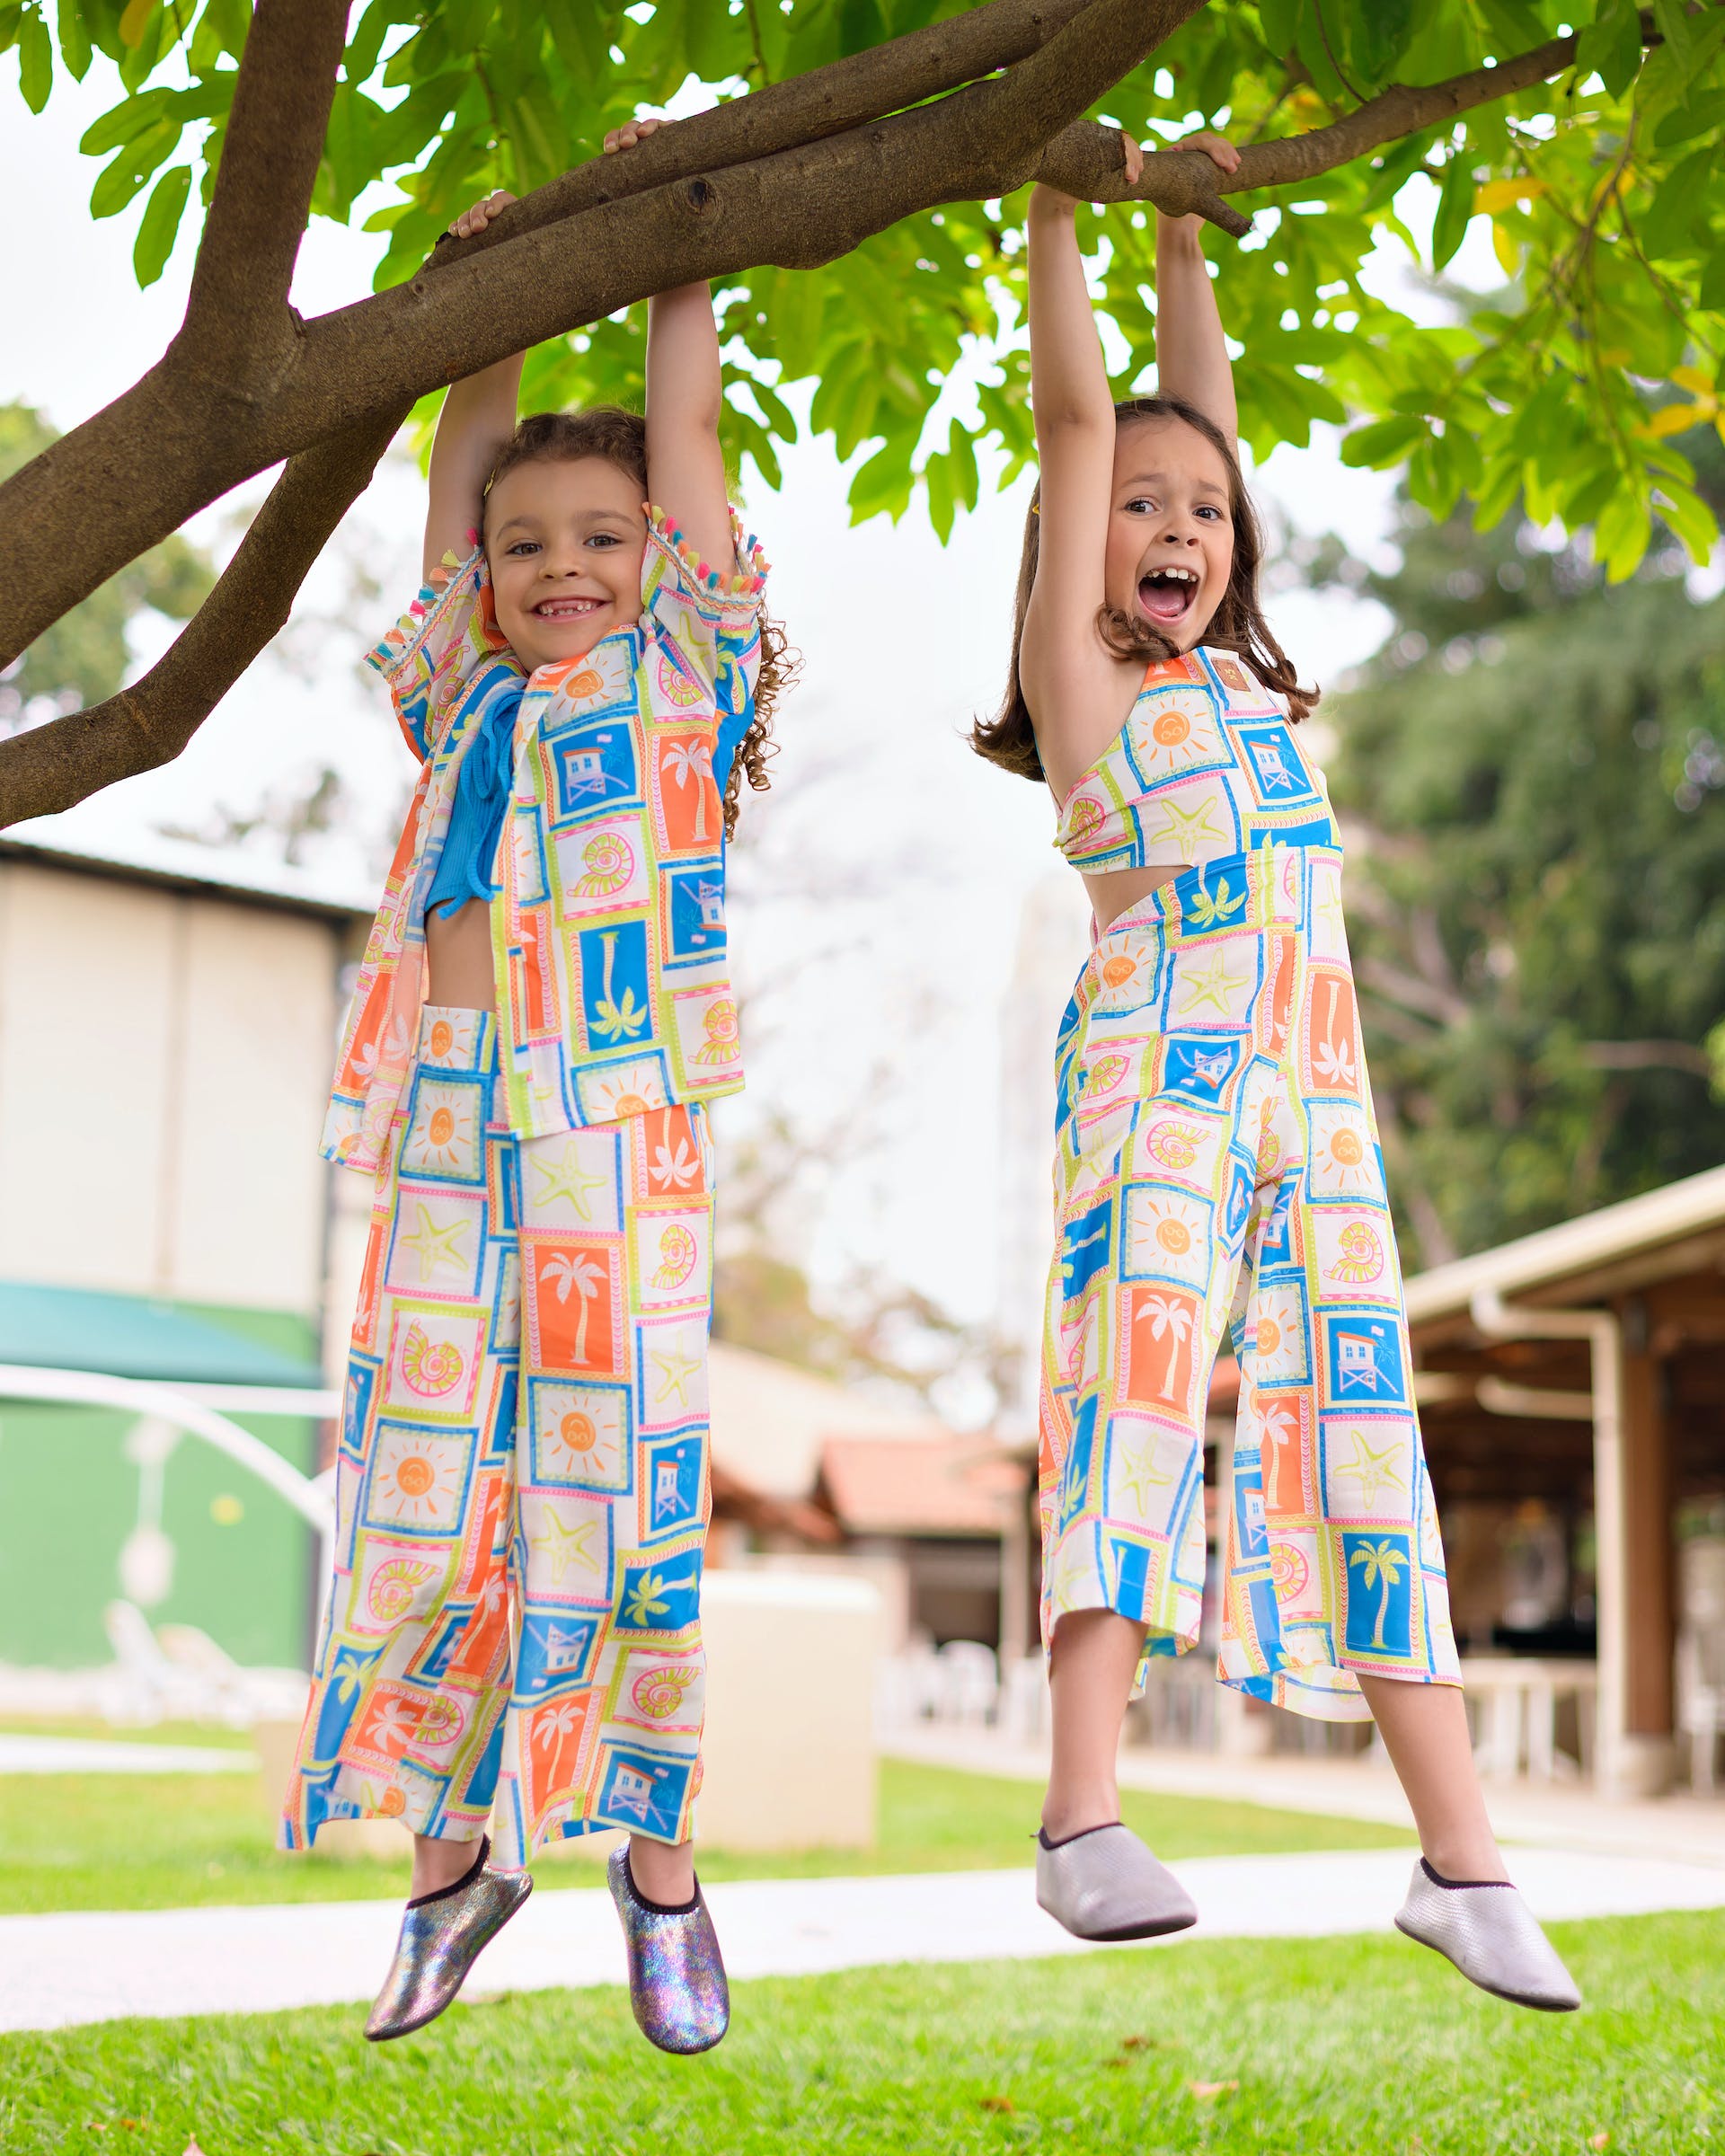 Two smiling young girls wearing the same dress are hanging from a tree branch | Source: Pexels